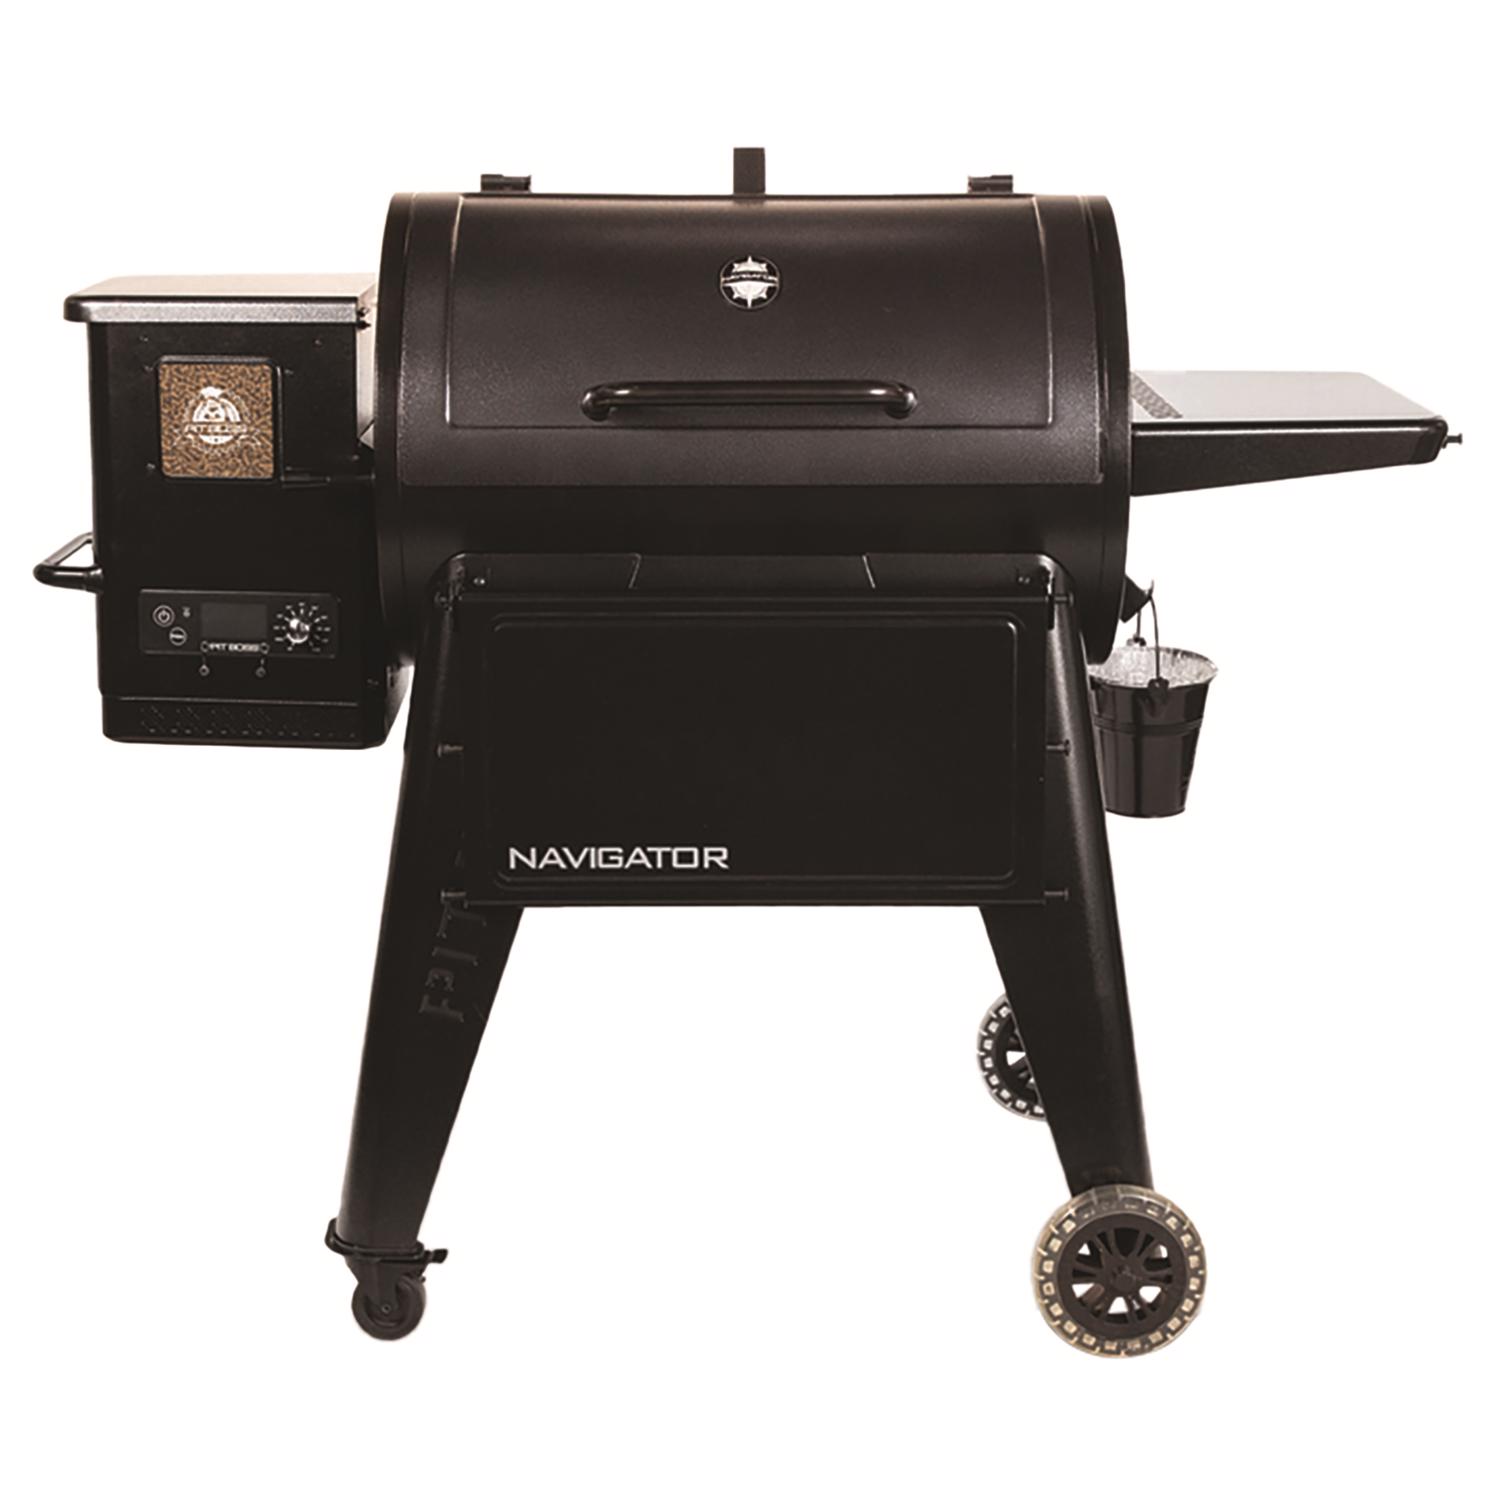 Pit Boss Navigator 850 Wood Pellet Grill Black by Pit Boss Deals and